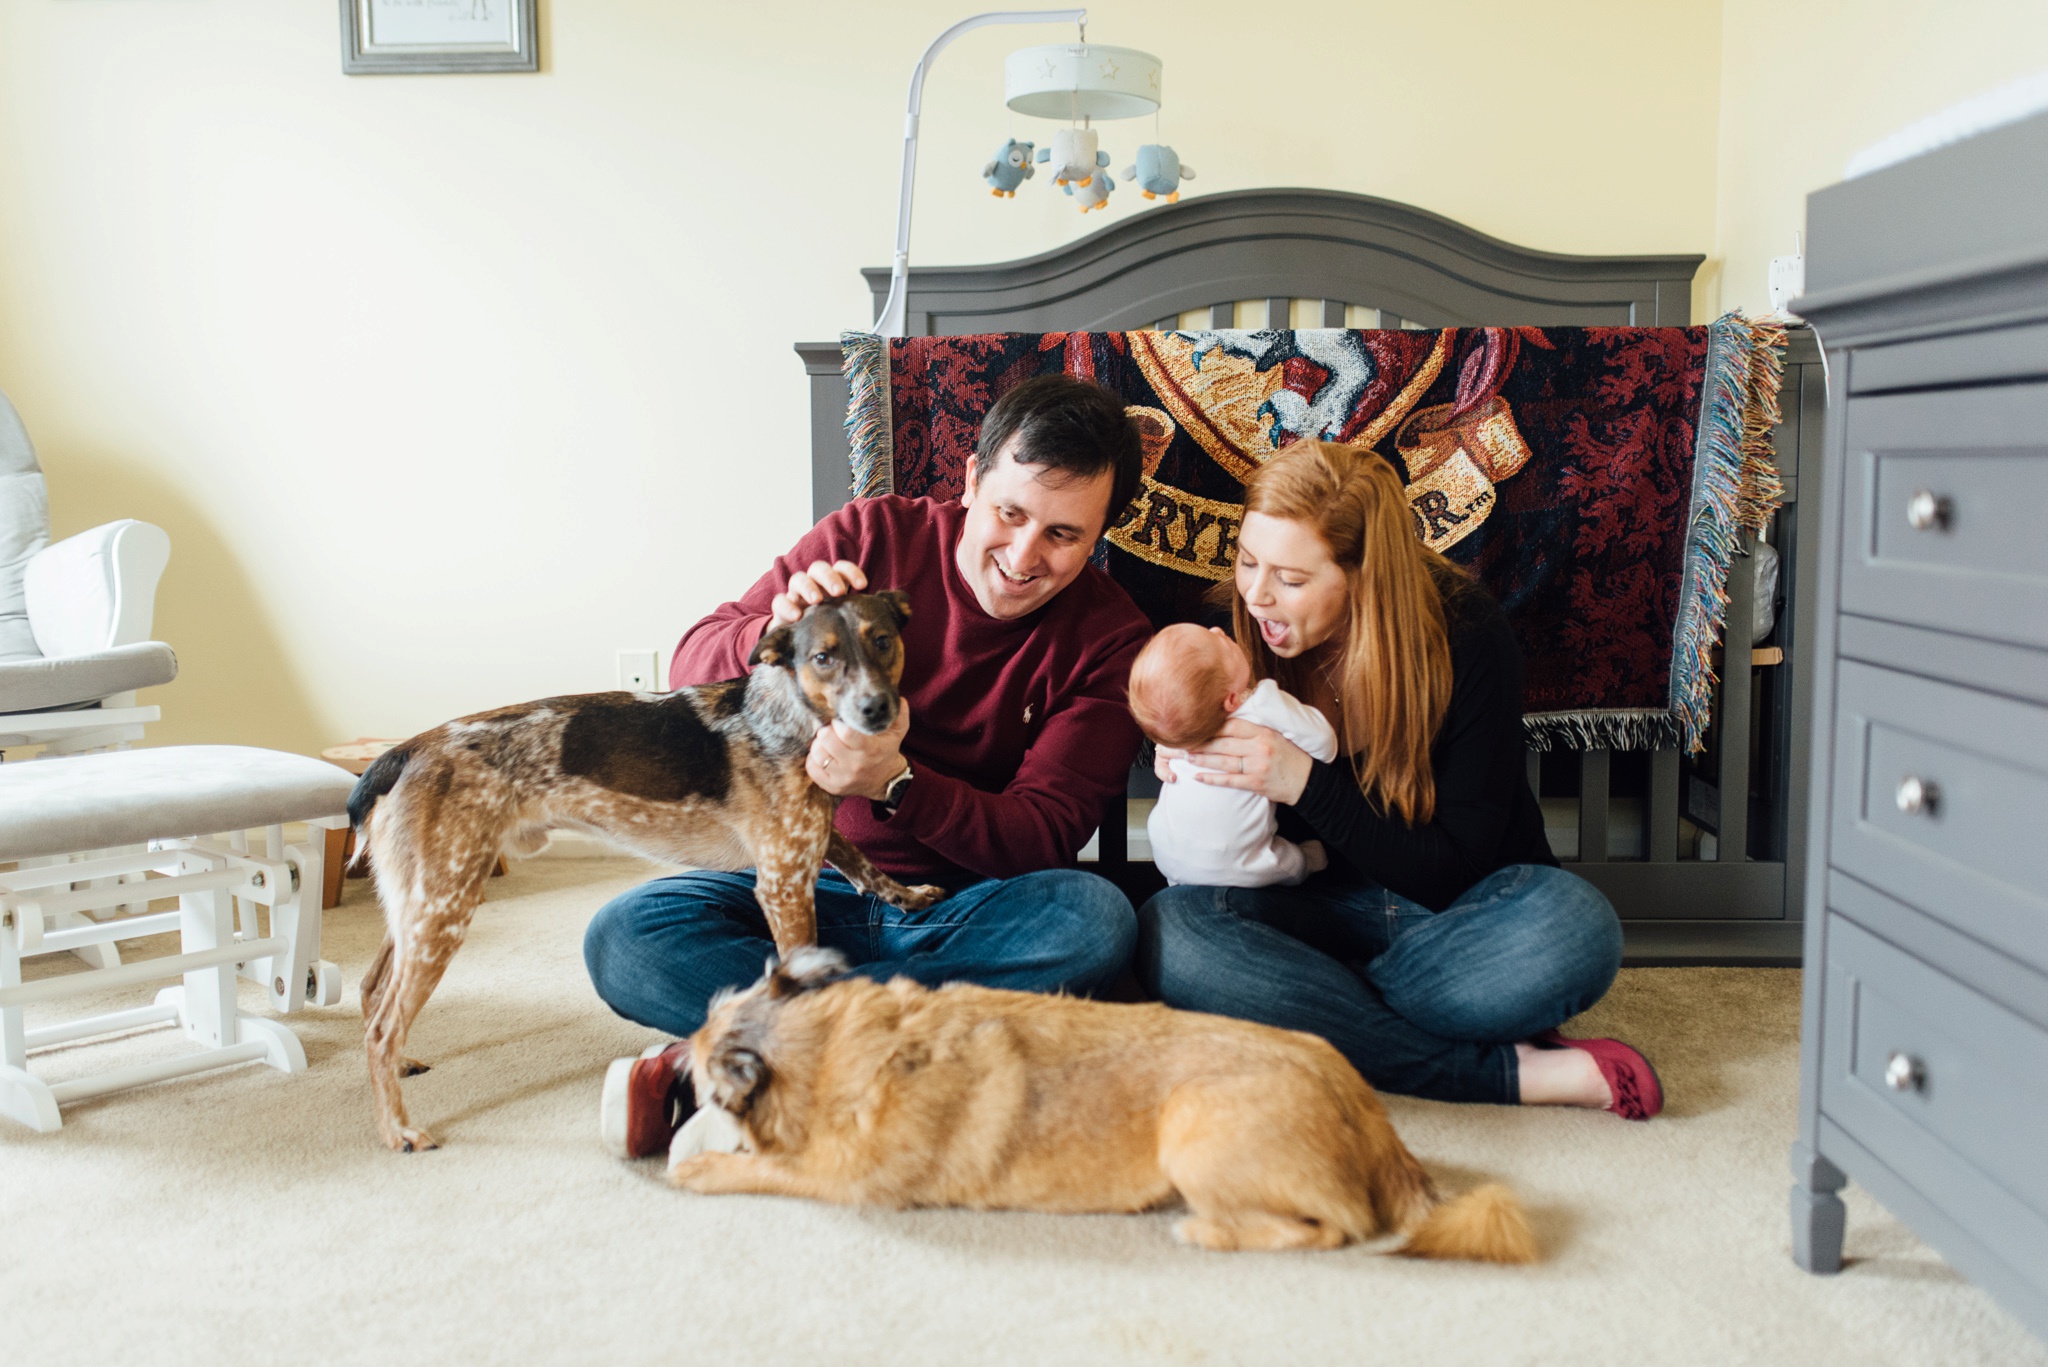 Natale - In Home Lifestyle Family Session - New Jersey Family Photographer - Alison Dunn Photography